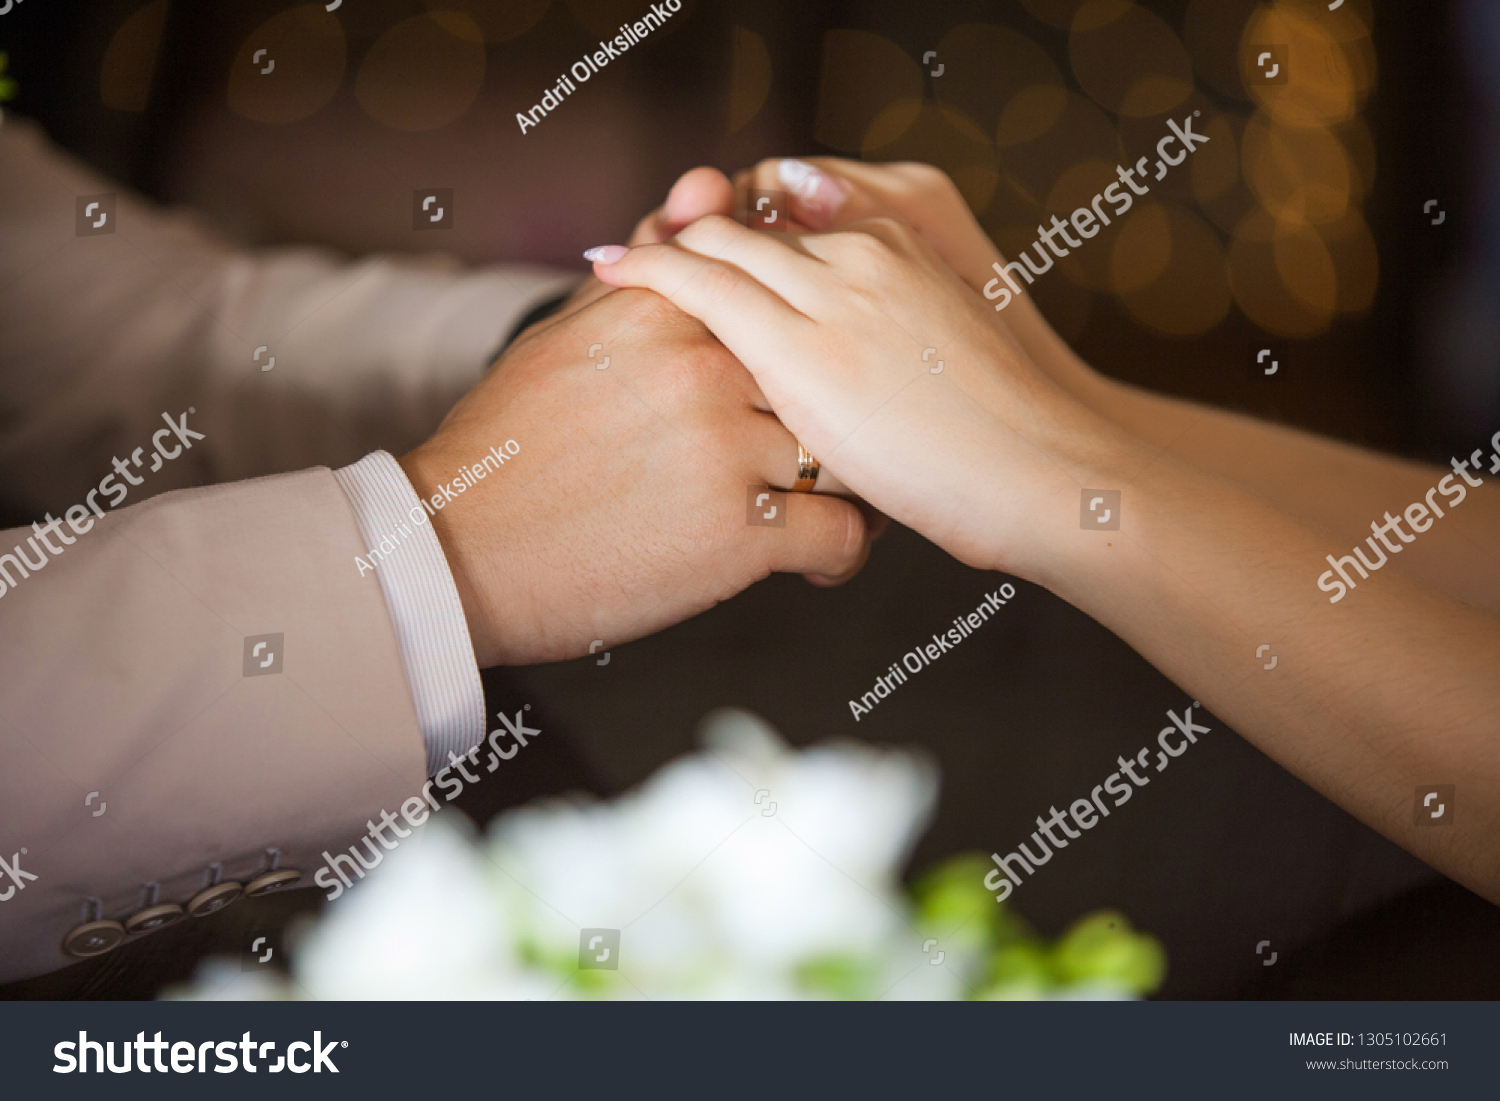 Close up side view of man and woman holding hands while sitting at wooden table in front of each other. Female and male hands of bride and groom on wedding day. Horizontal color photography. #1305102661